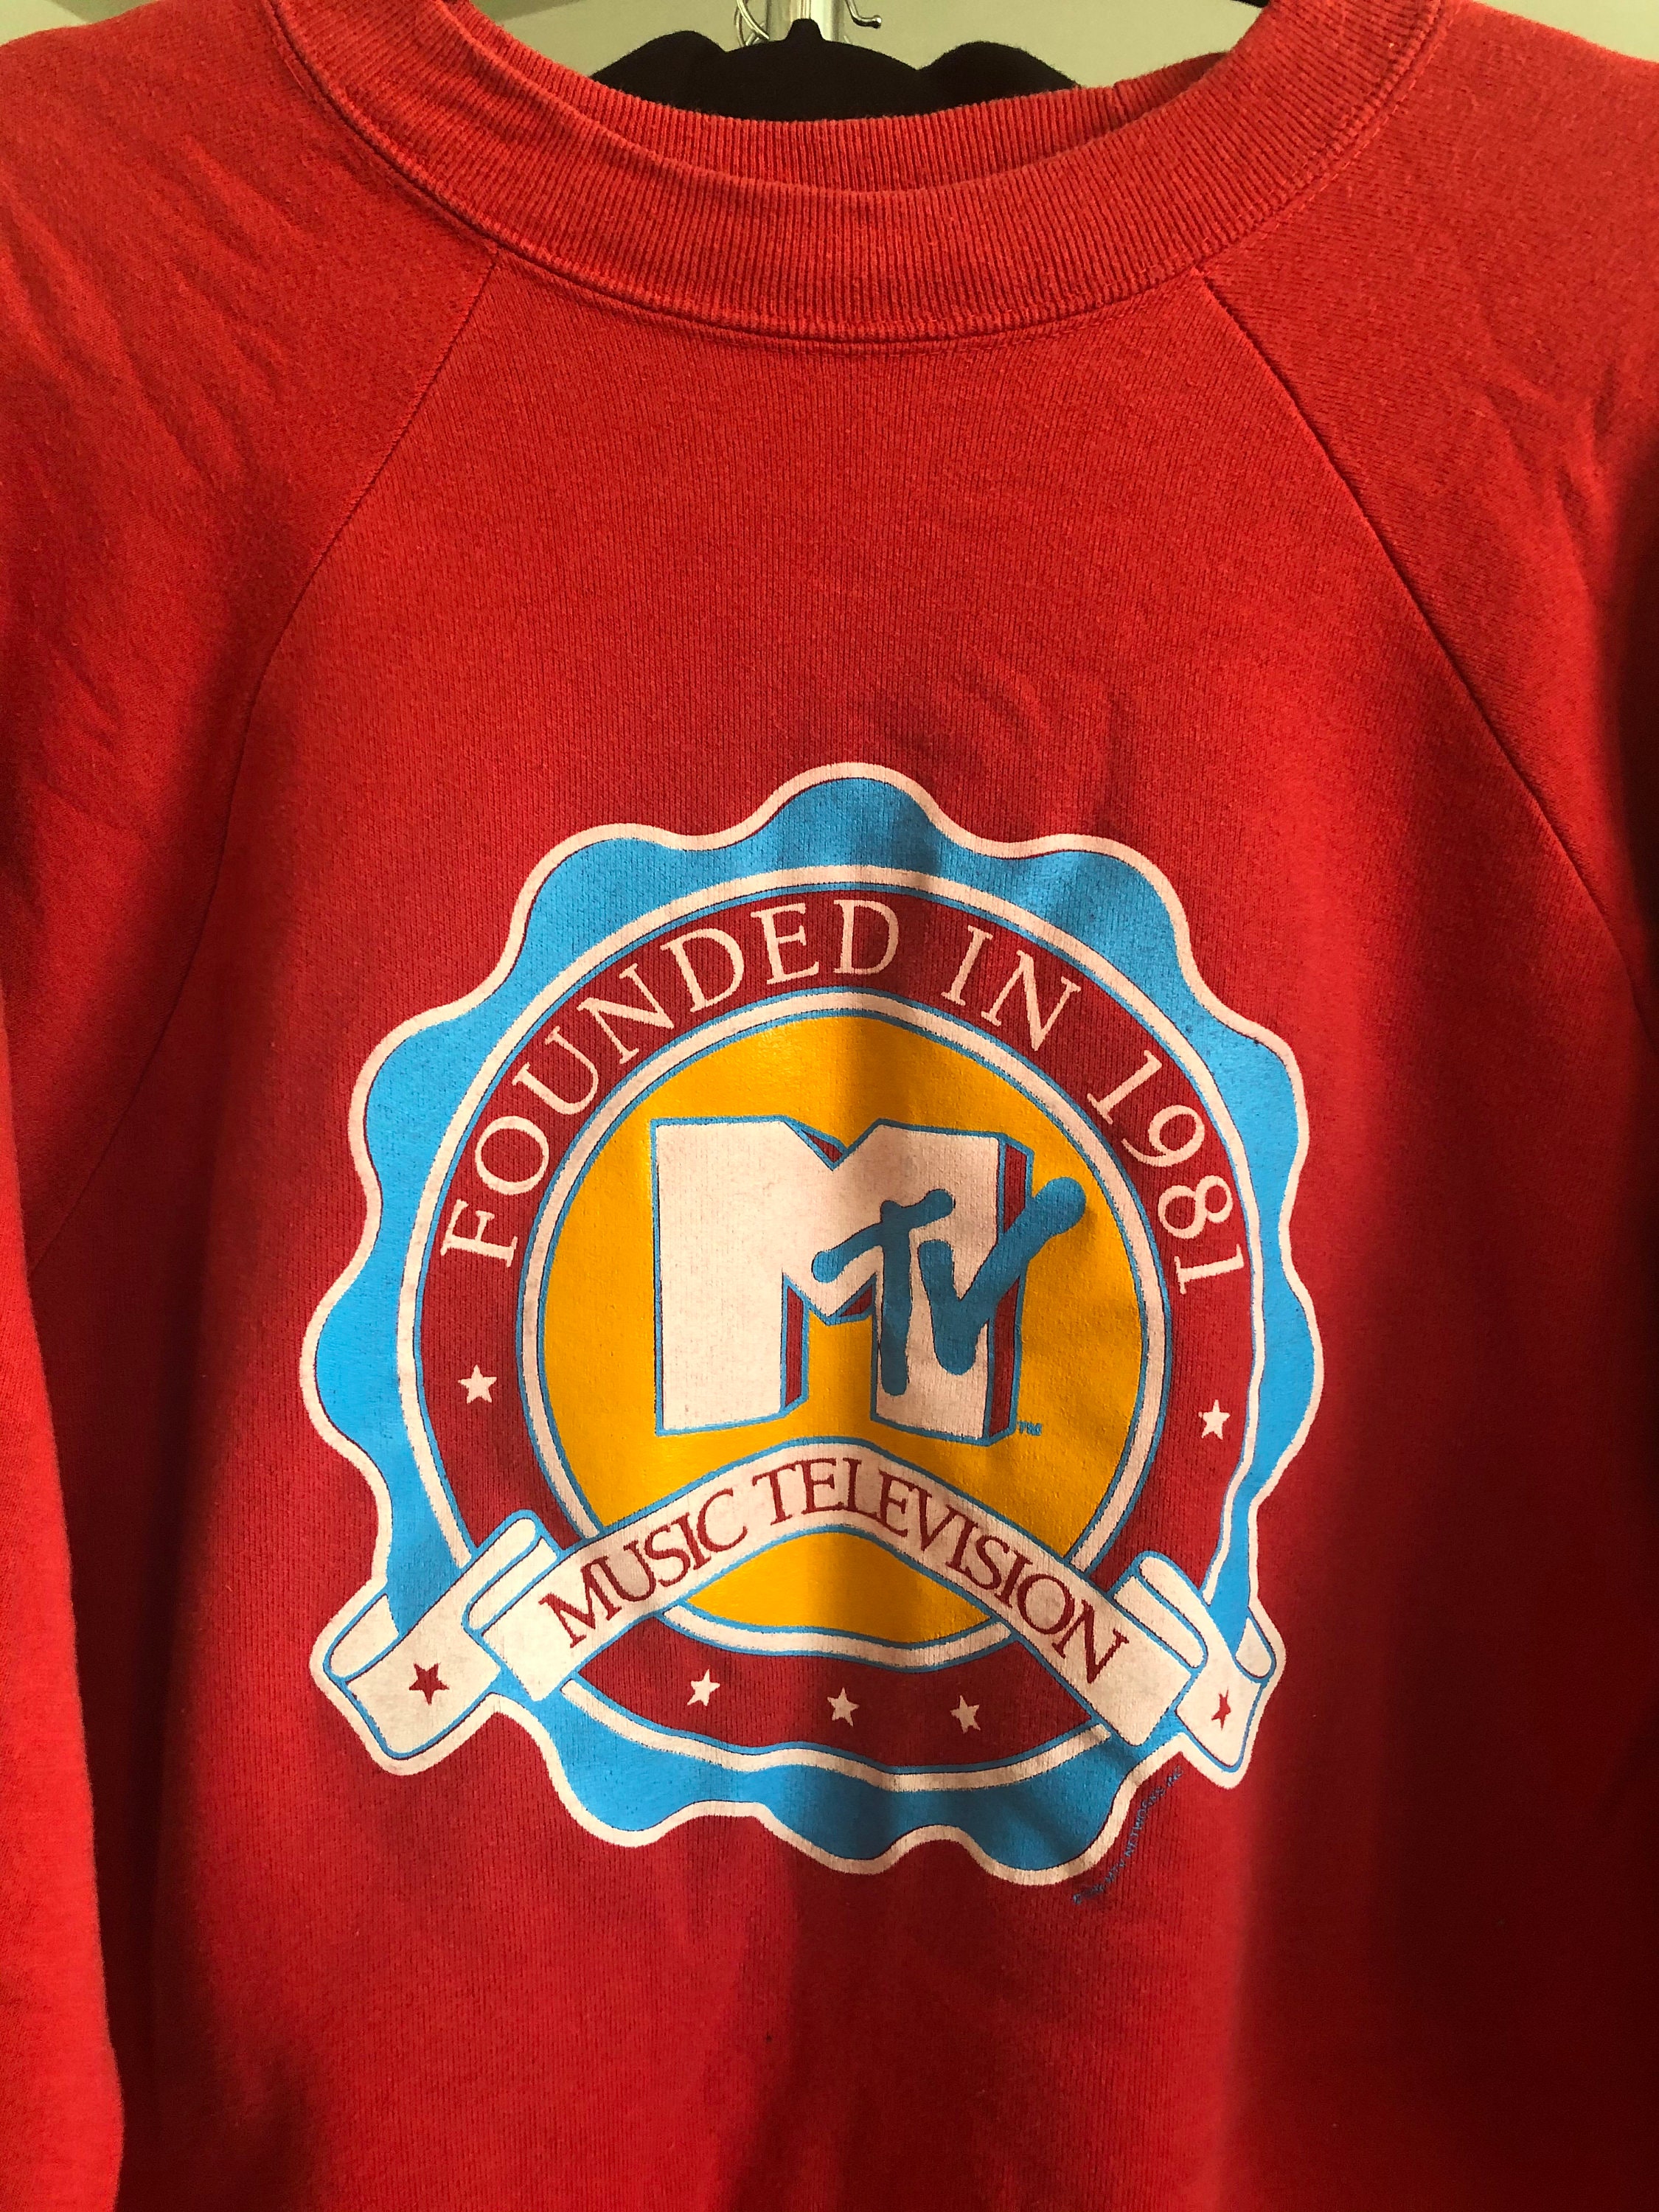 Vintage MTV Music Television Founded in 1981 Crewneck Pullover ...